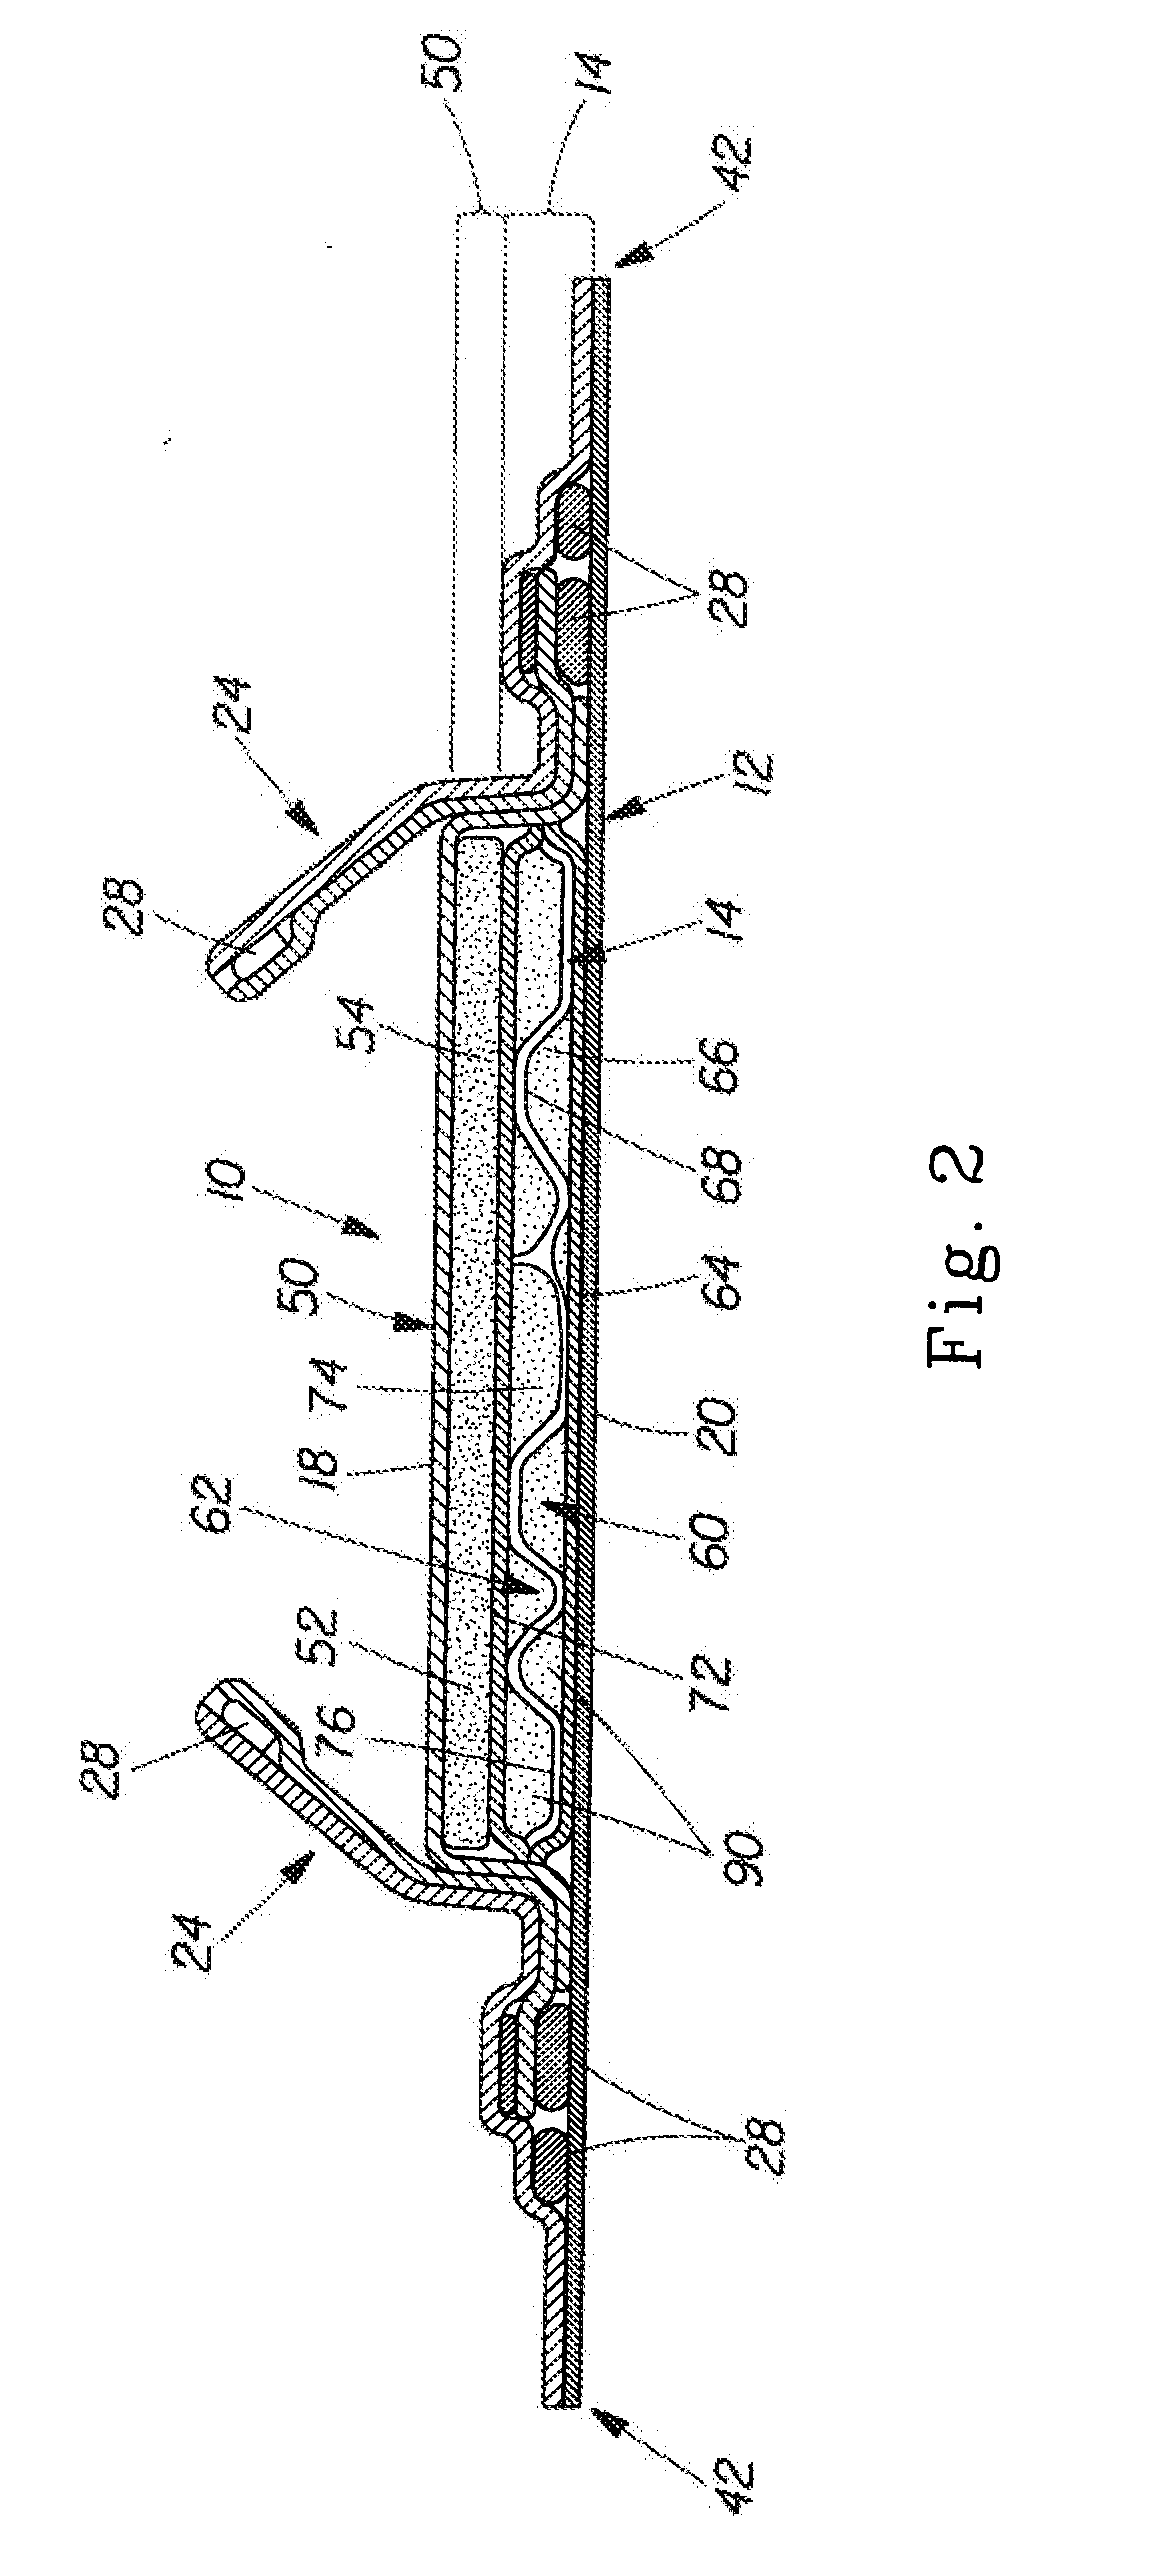 Disposable Absorbent Article With Substantially Continuously Distributed Absorbent Particulate Polymer Material And Method